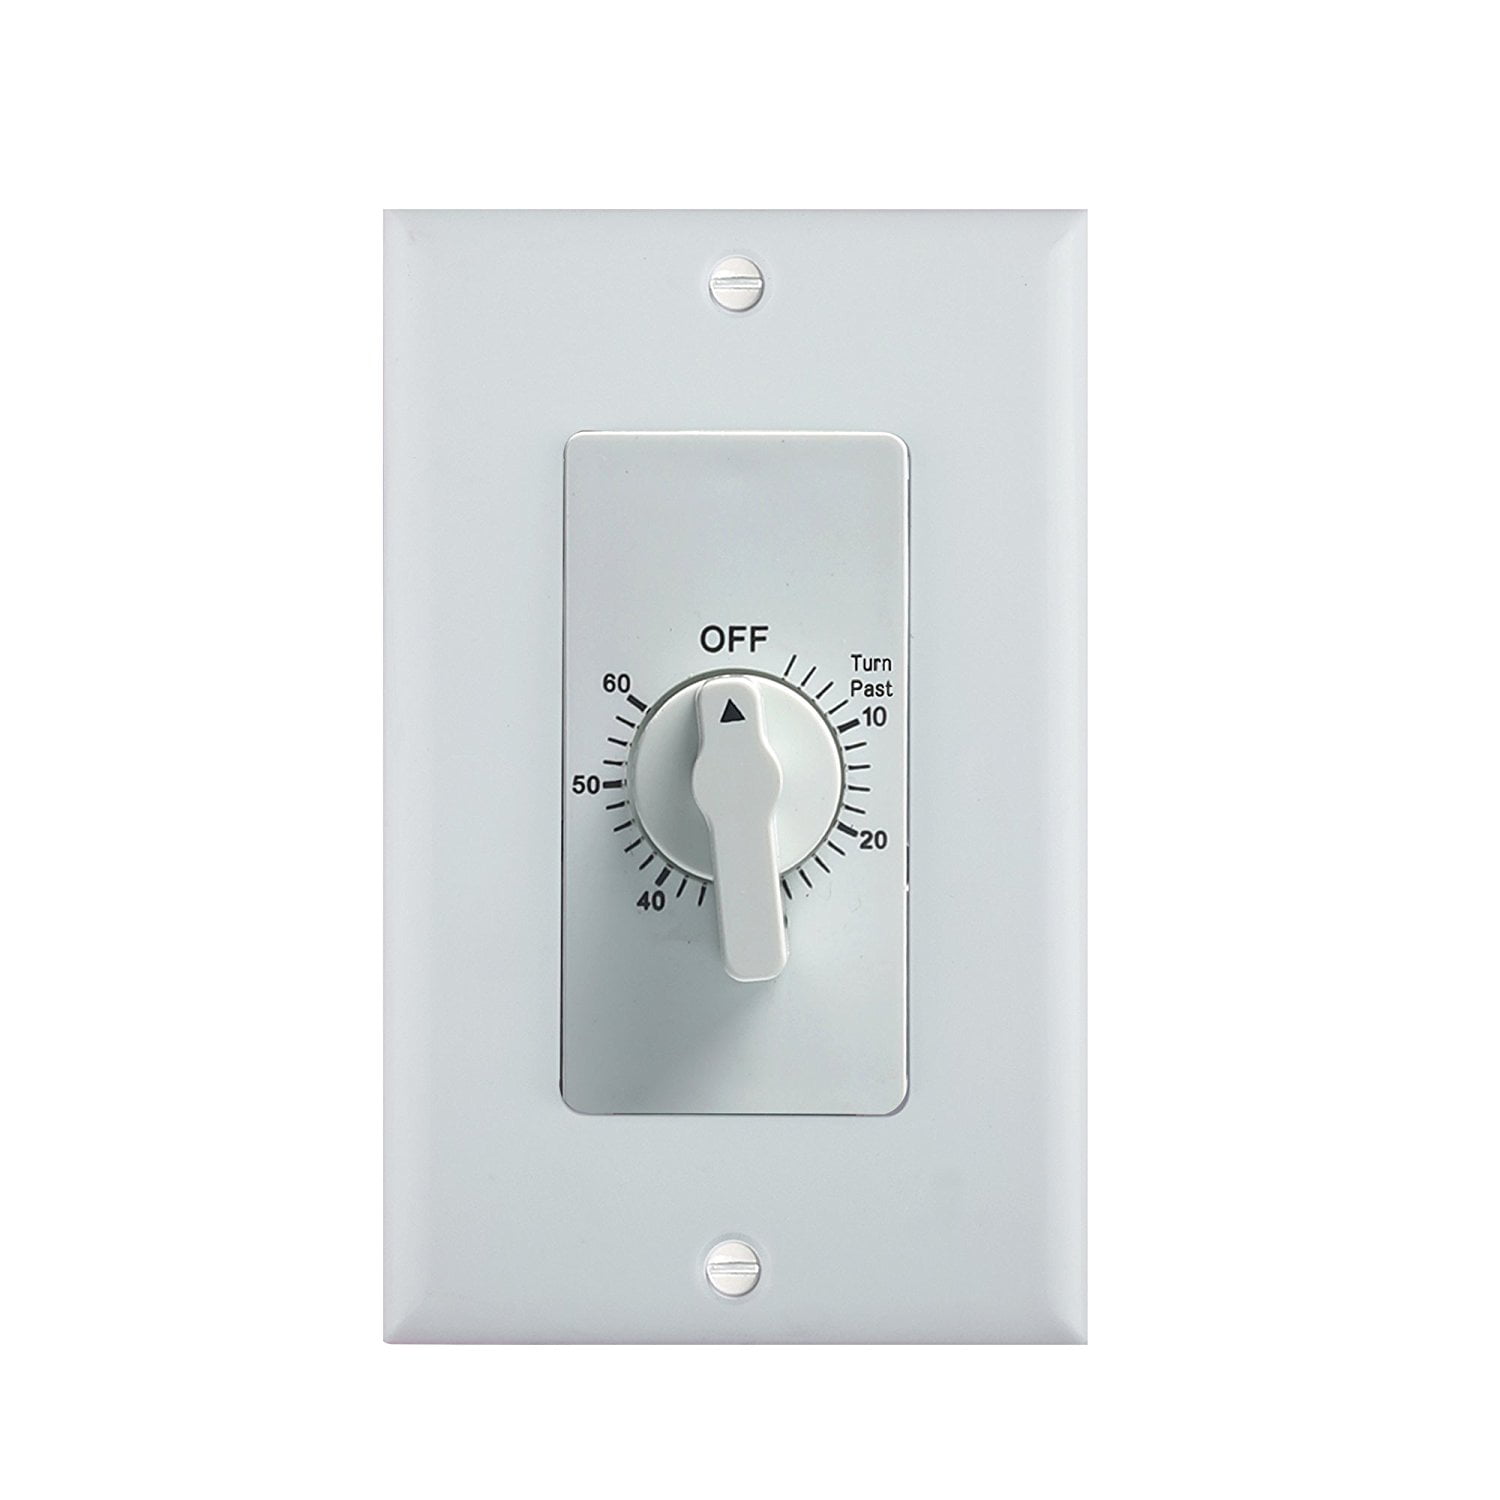 IN WALL TIMER FOR EXHAUST FANS OR LIGHTING 60 MINUTE DIGITAL WALL TIMER 